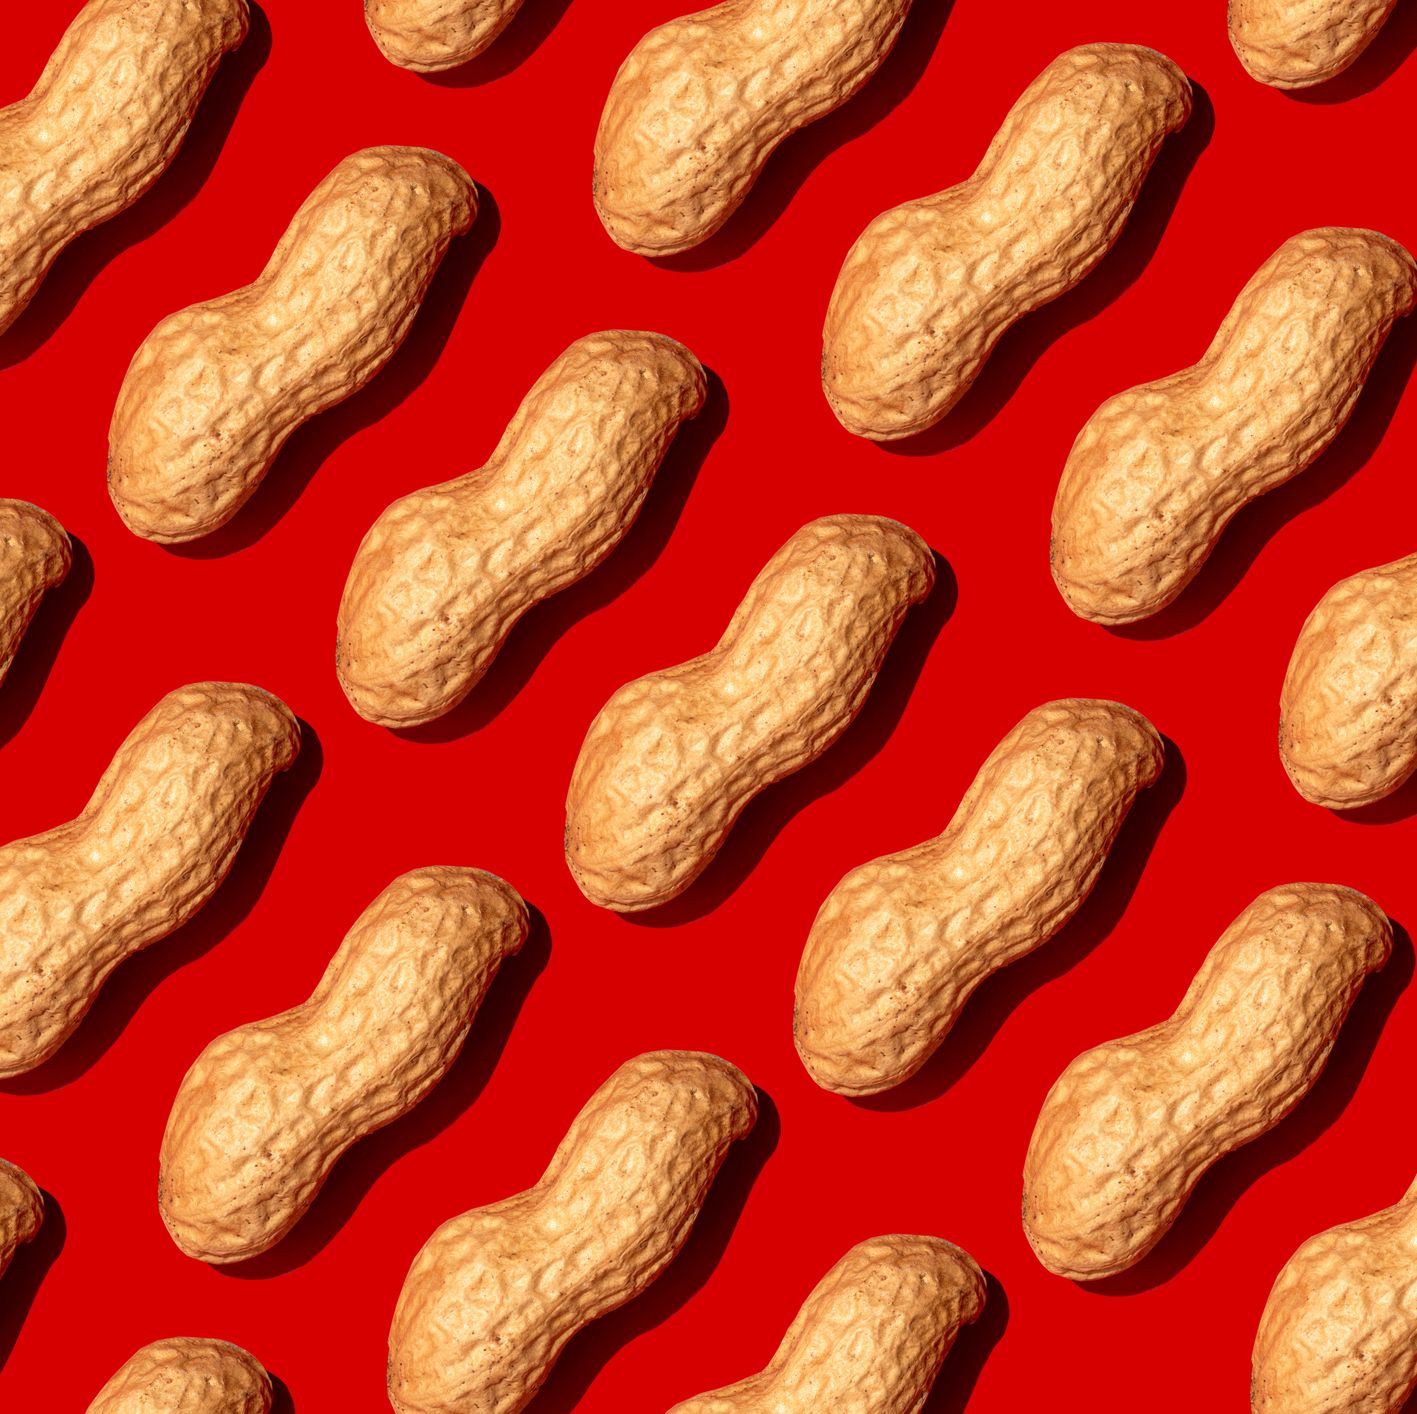 repeated nuts on the red background